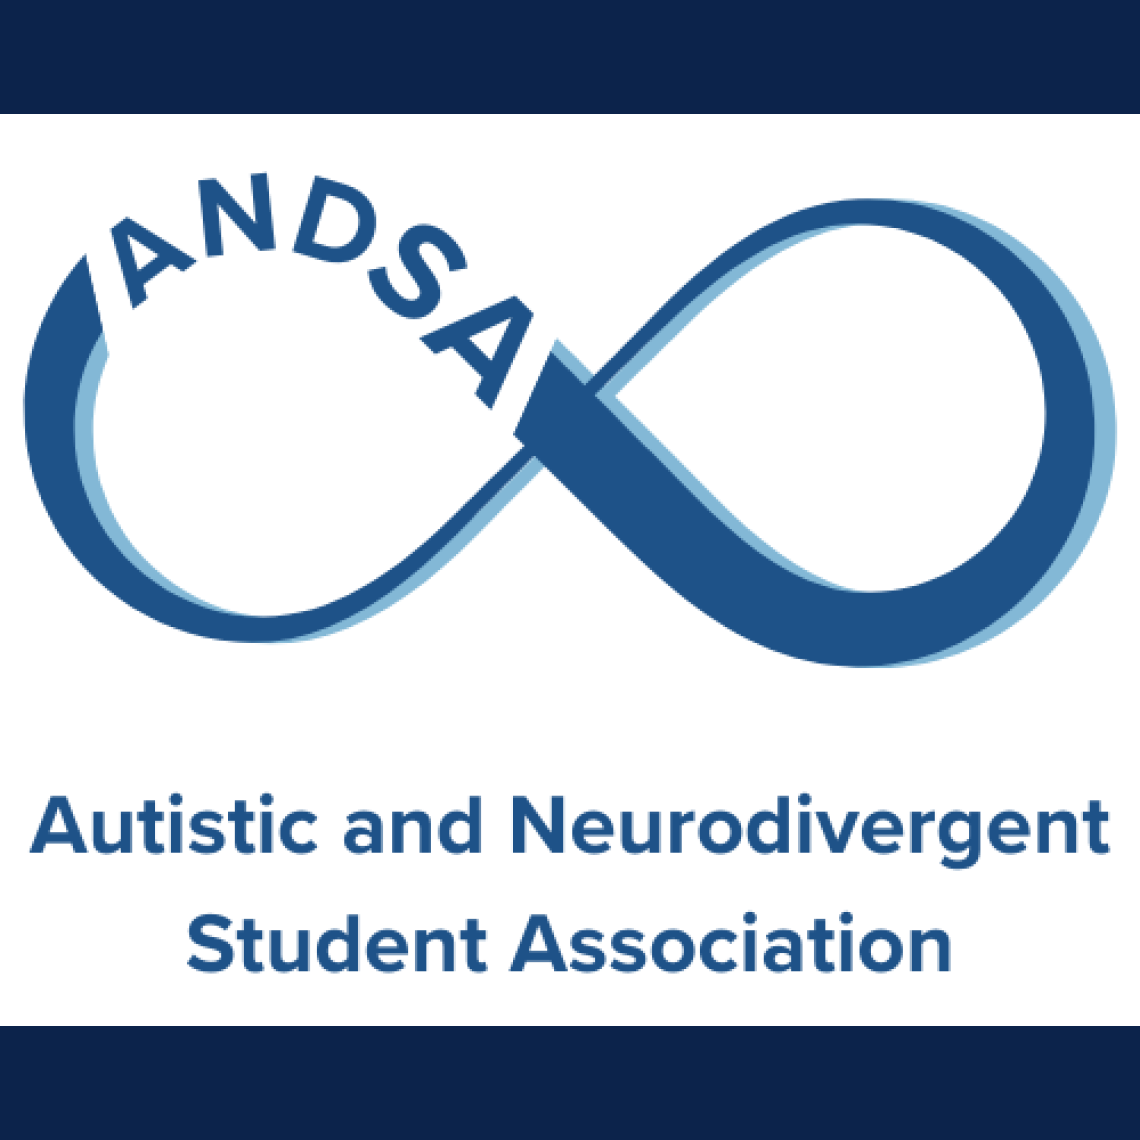 Blue infinity symbol with words ANDSA Autistic and Neurodivergent Student Association